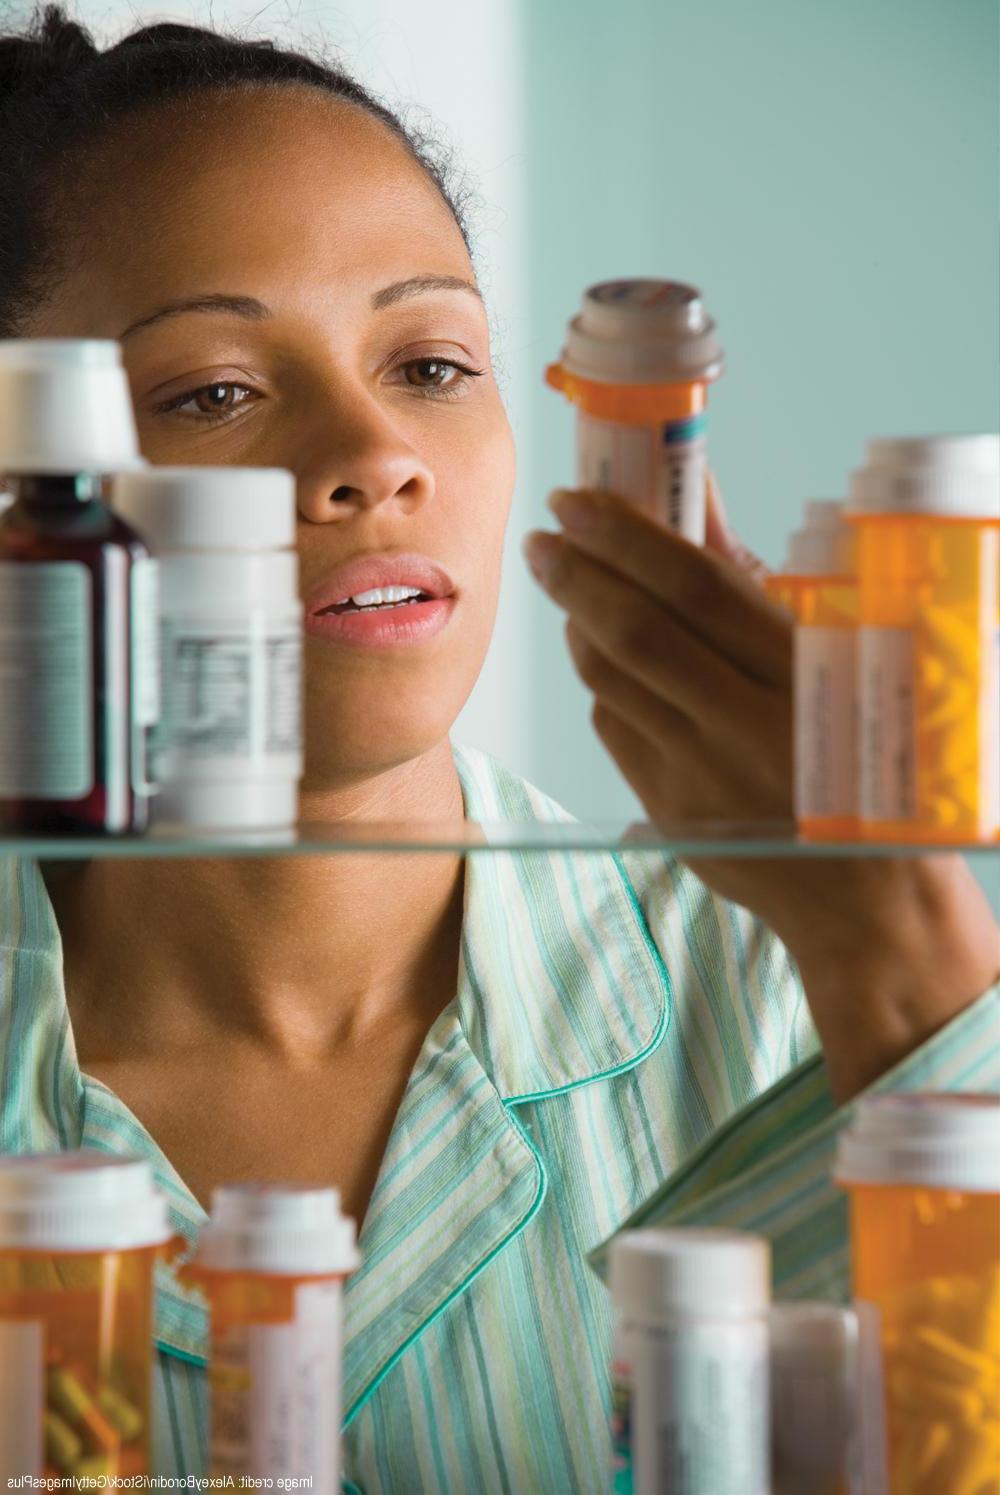 photo of woman inspecting medicines in cabinet